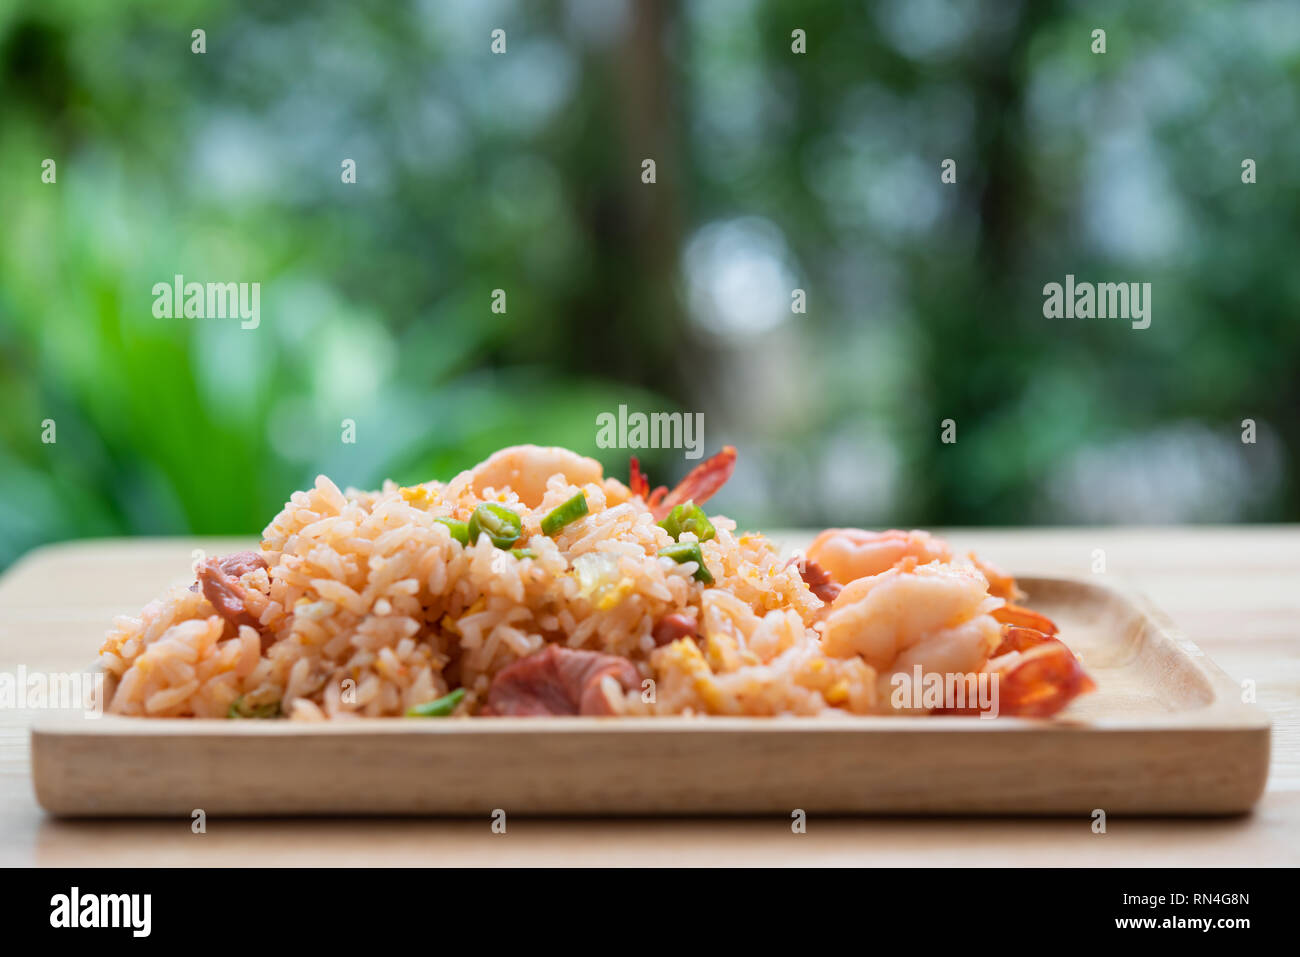 Delicious Thai fried rice with shrimp on wooden table with beauitful vase ,green blurred background Stock Photo